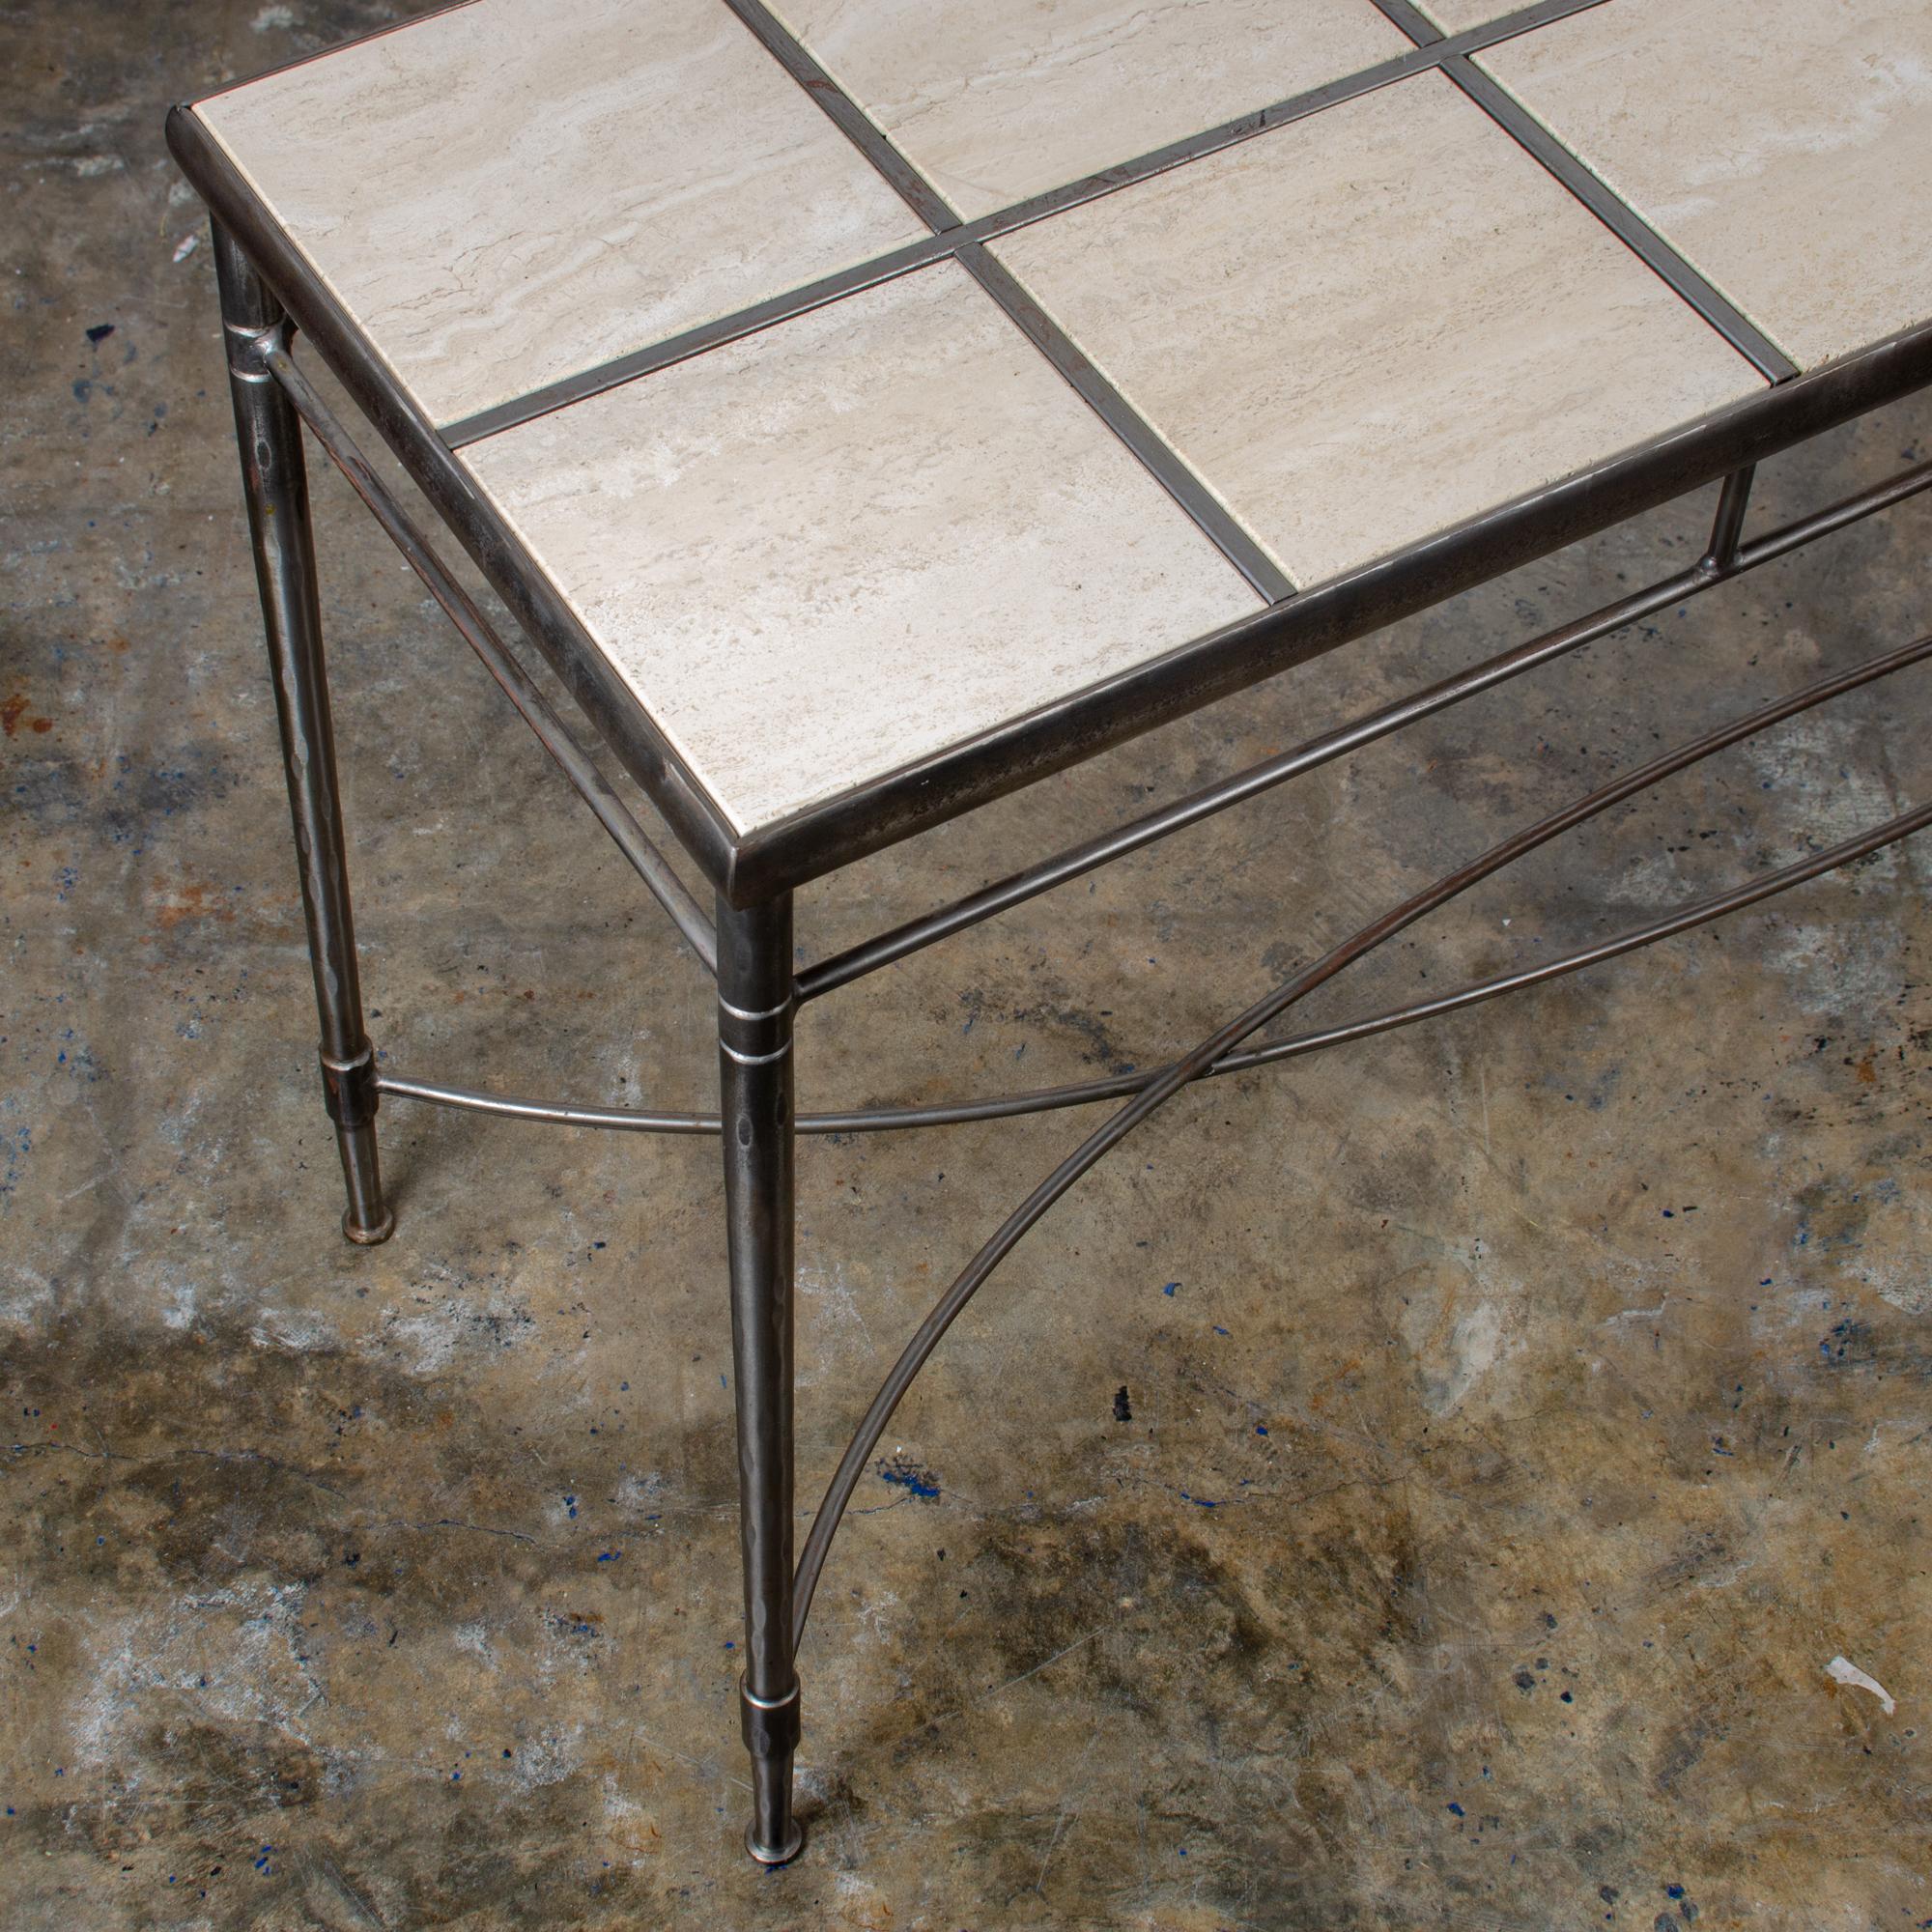 Italian Iron and Travertine Tile Console Table Regular price In Good Condition For Sale In Savannah, GA